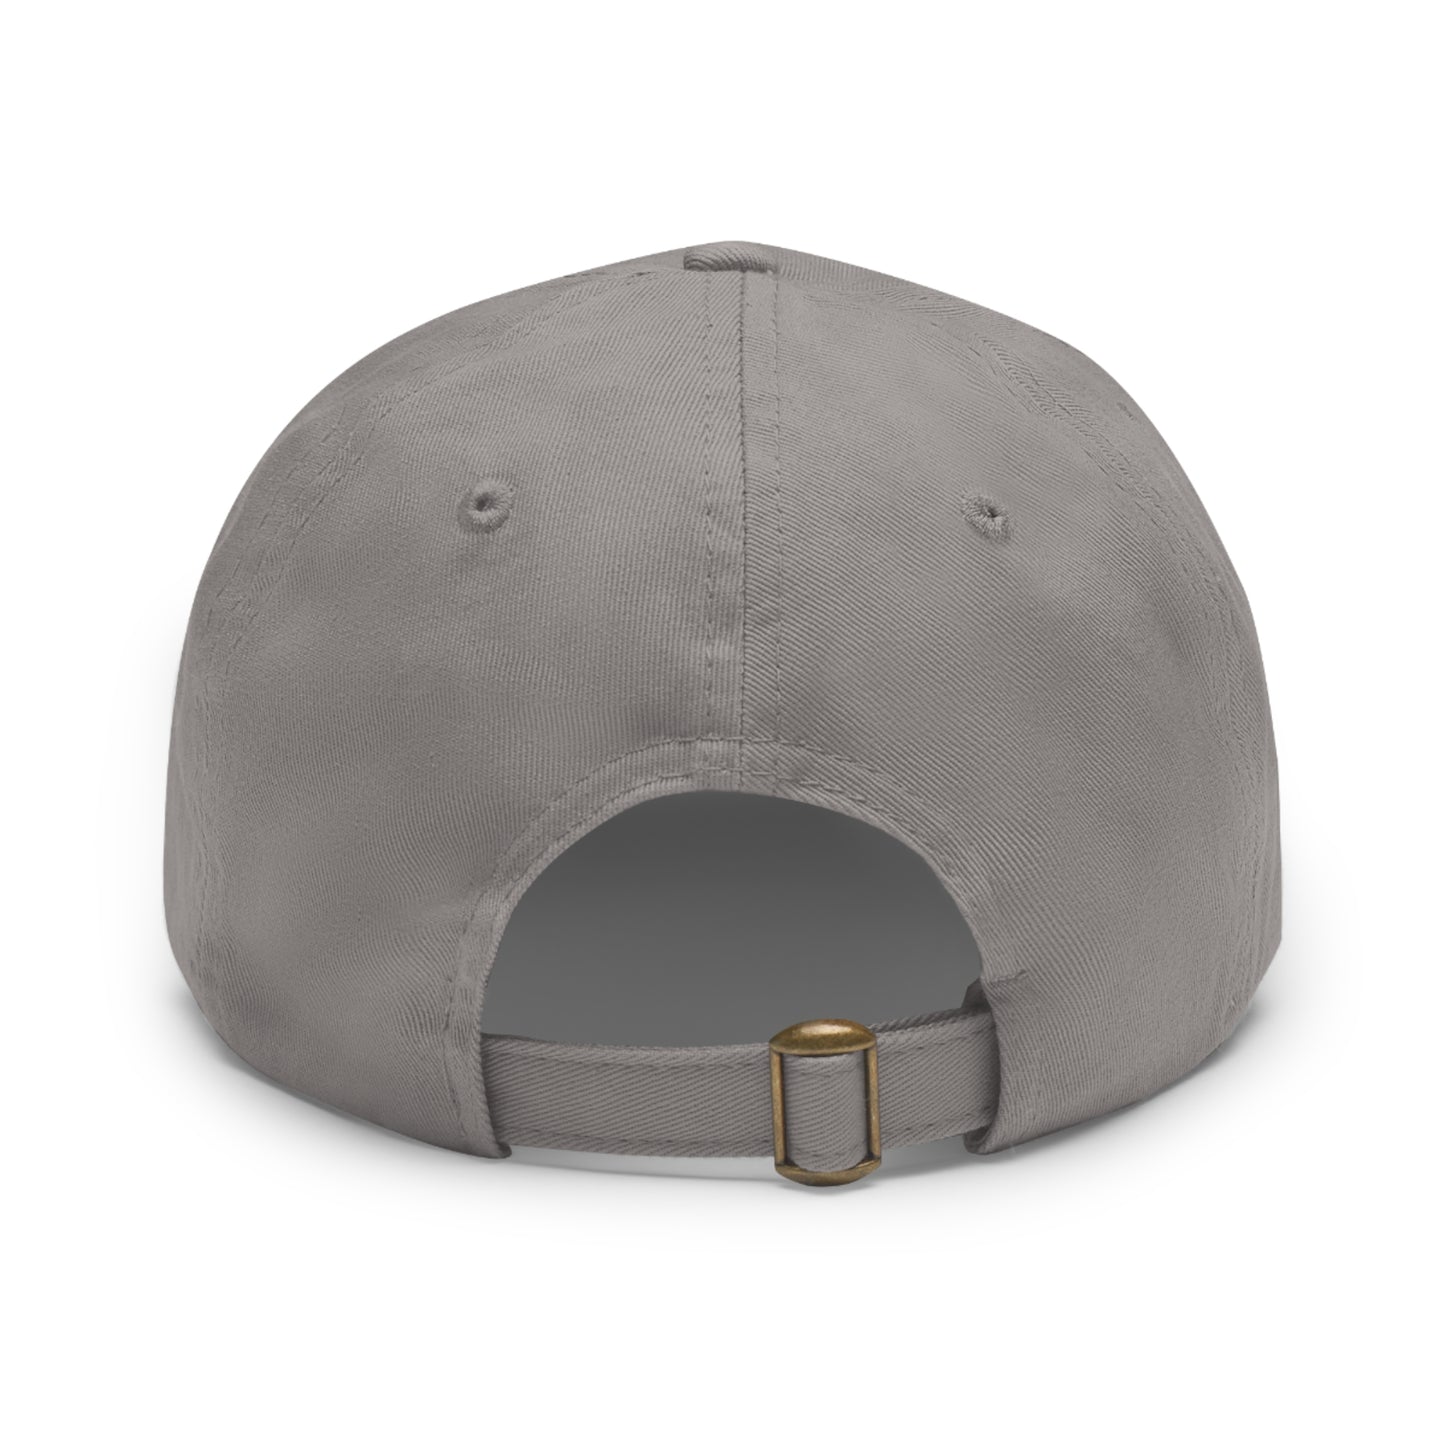 Copy of Dad Hat with Leather Patch (Round)